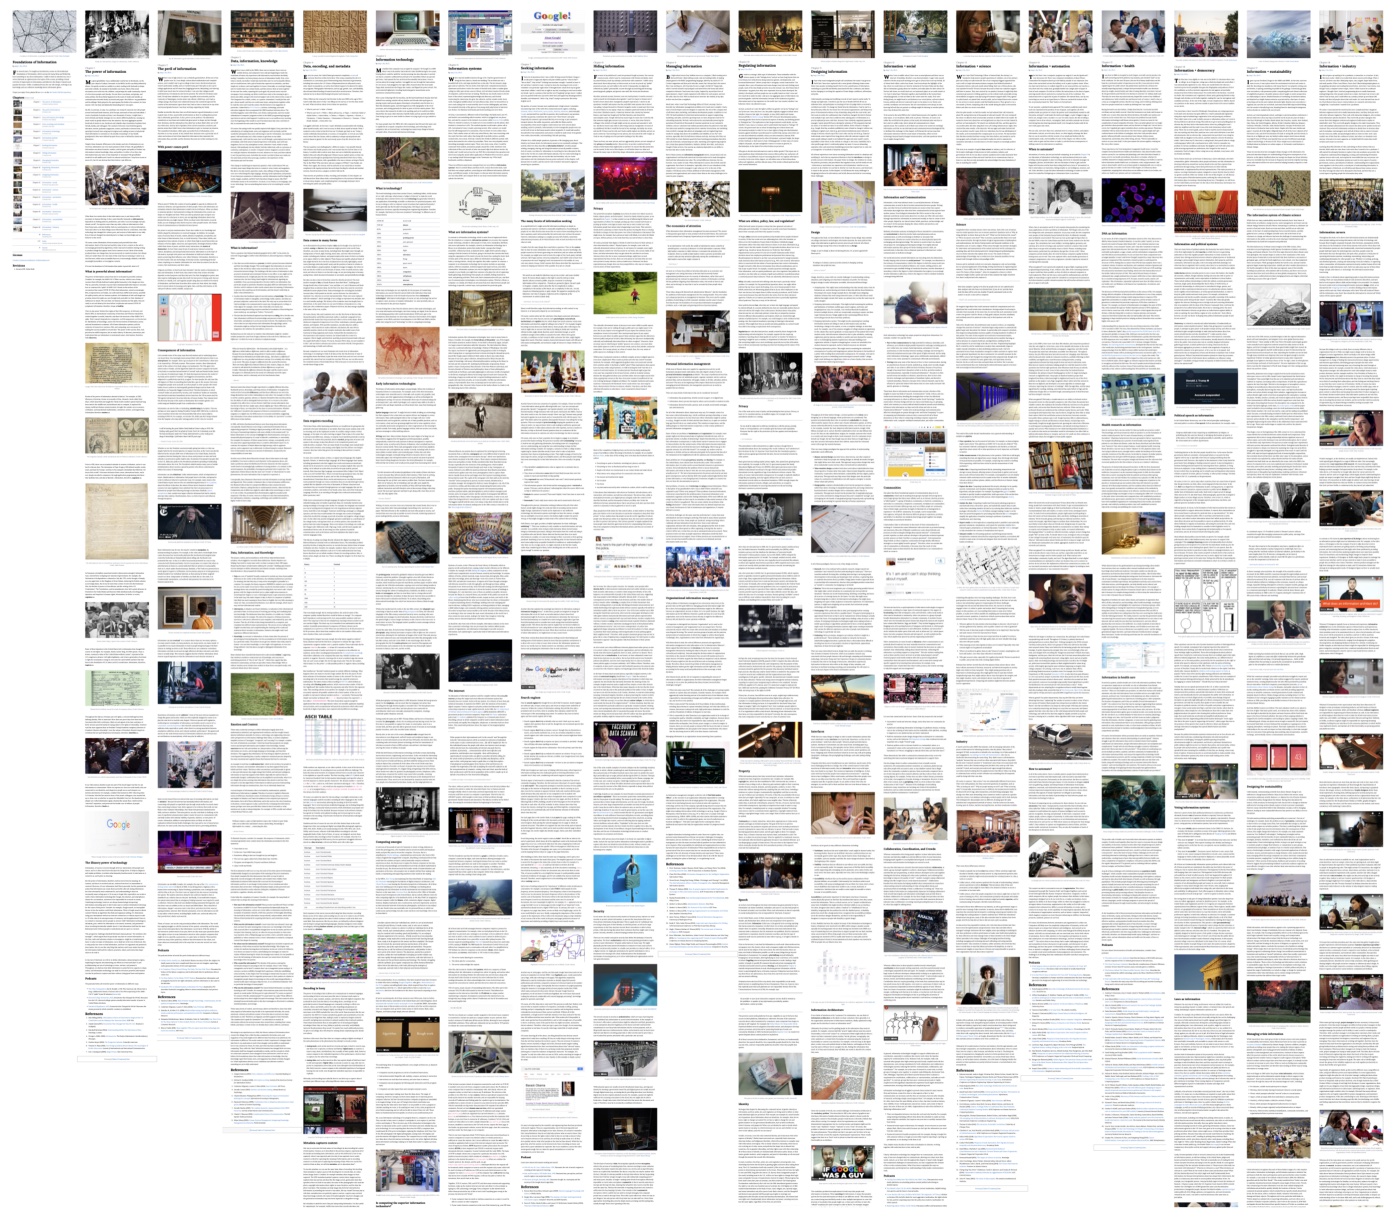 A collage of all 18 chapters of the book, showing 90,000 words and dozens of images, arranged in a row with varying height columns of text.